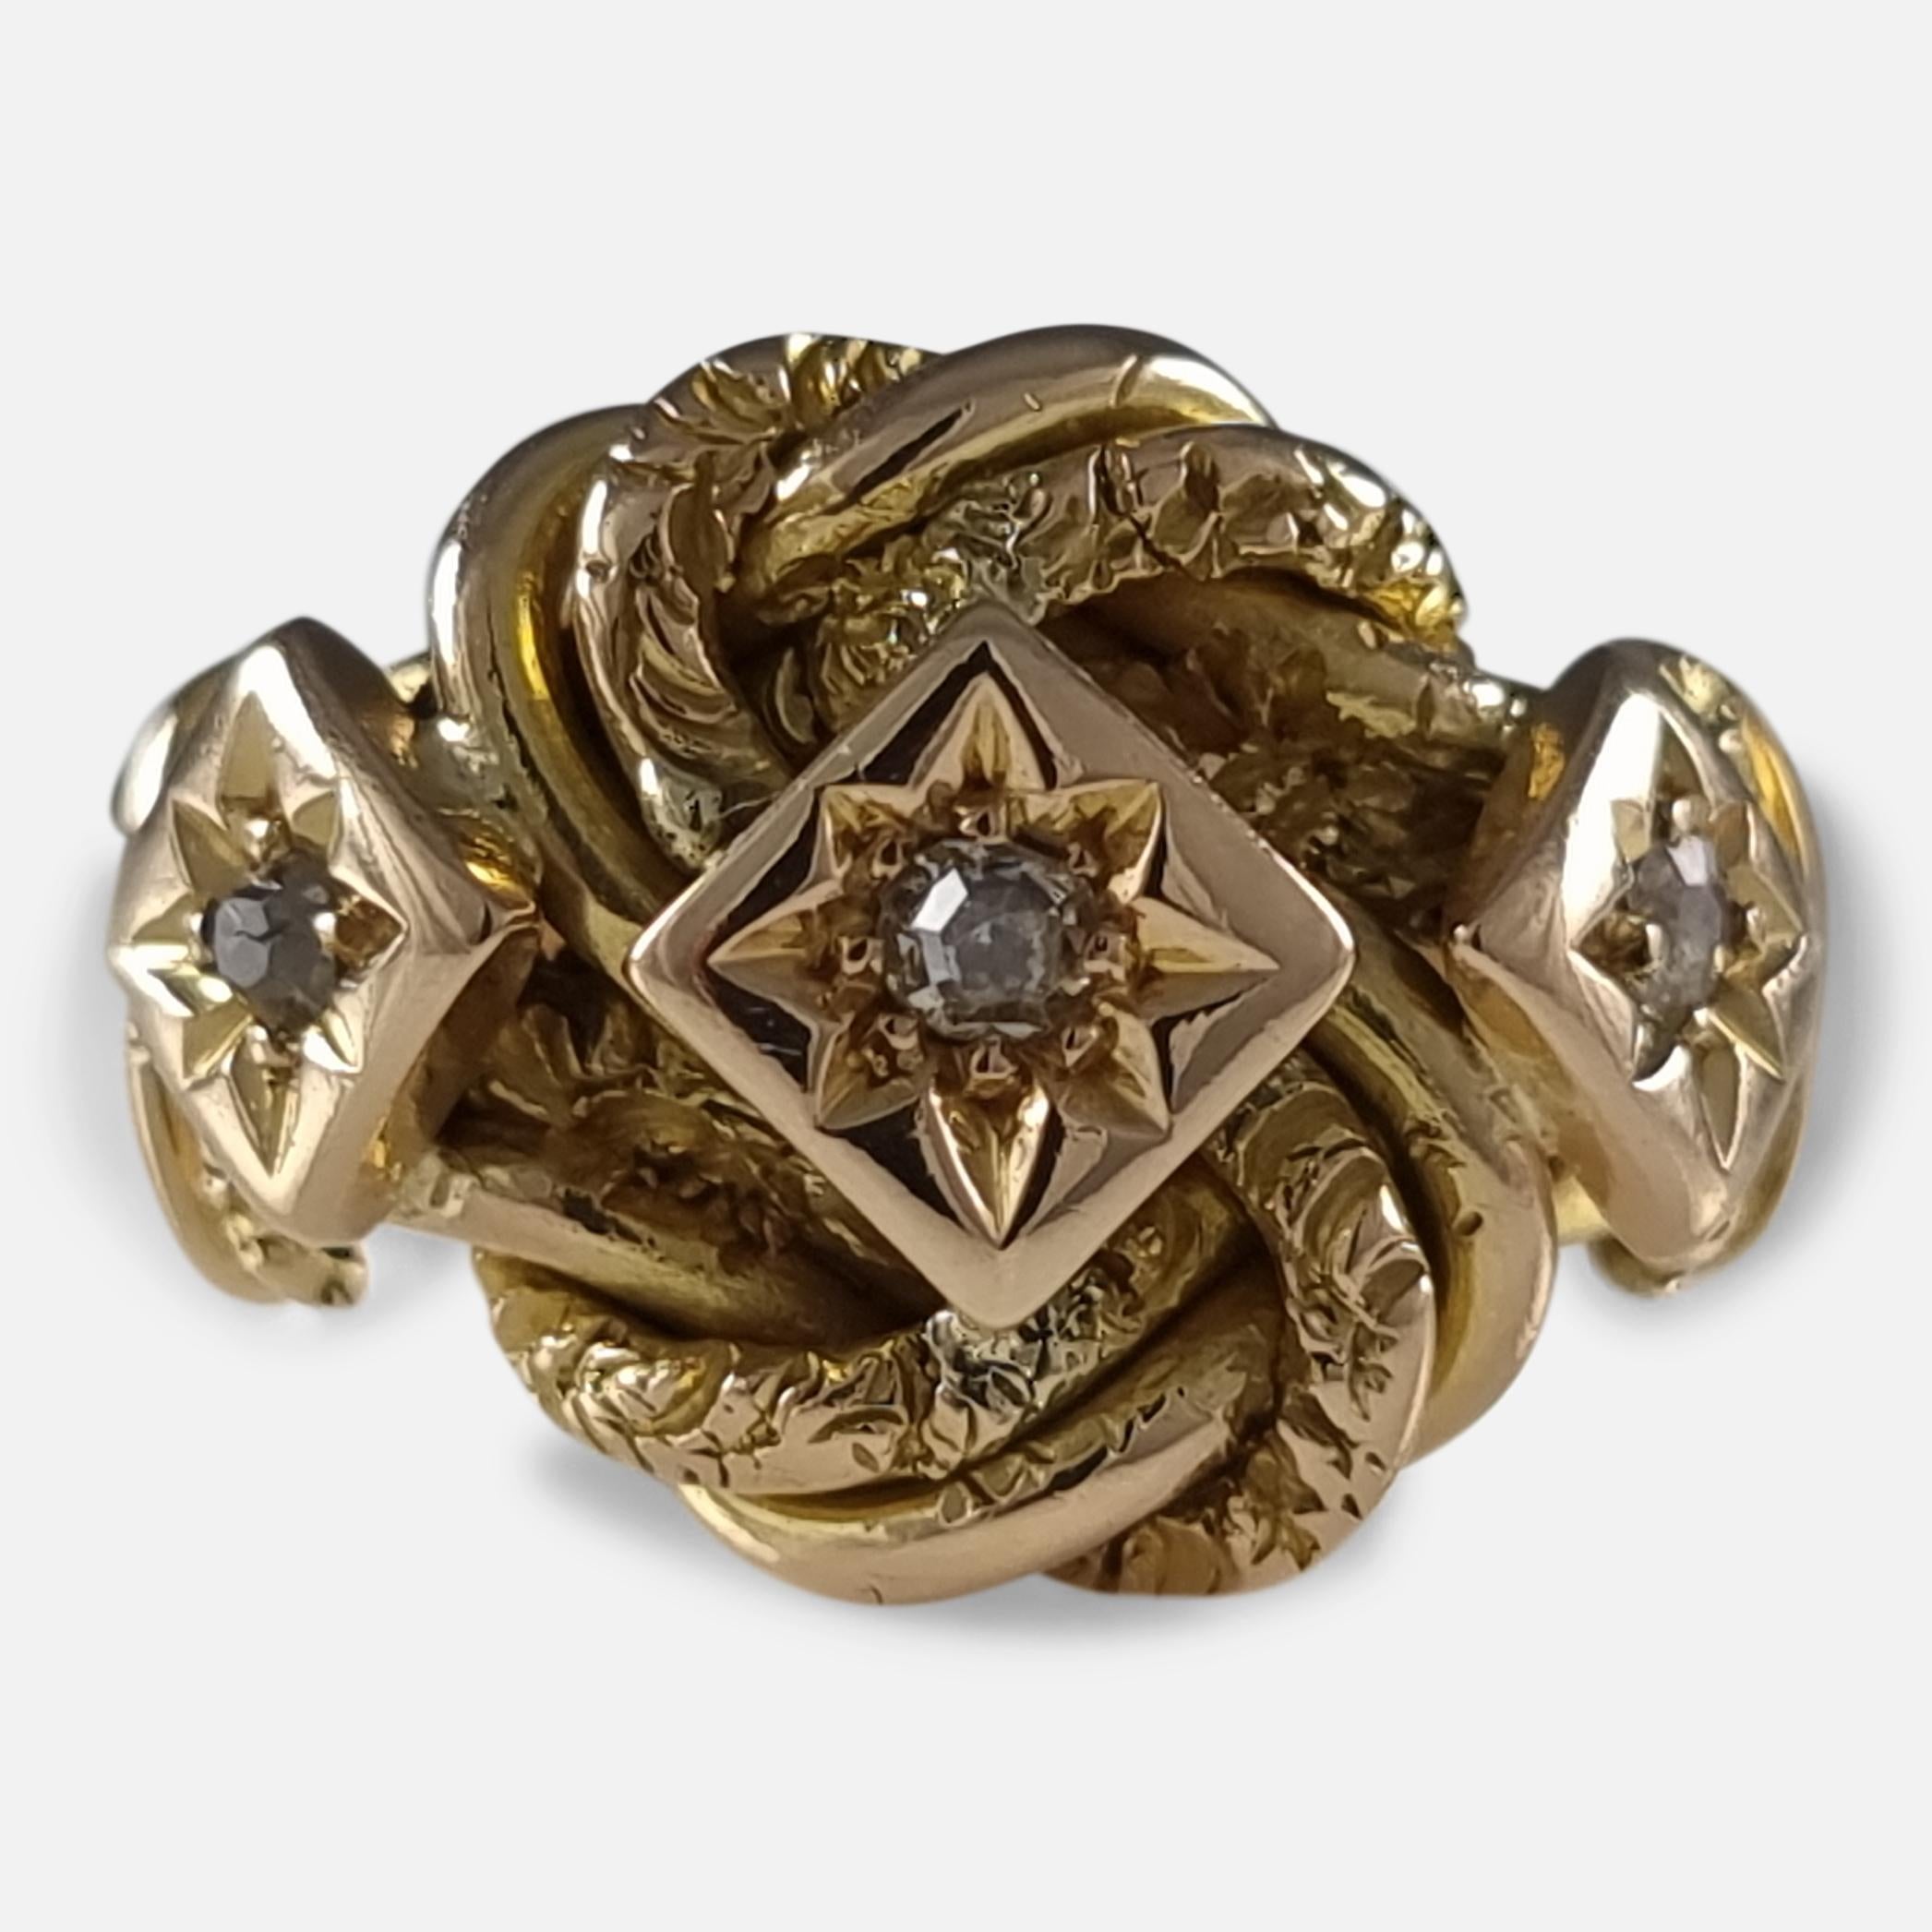 An 18ct yellow gold and diamond knot ring. The ring is set with three graduated old cut diamonds in star settings, on an engraved knot mount, with reeded shoulders and plain band.

The ring is UK hallmarked with the Birmingham Assay office stamp,